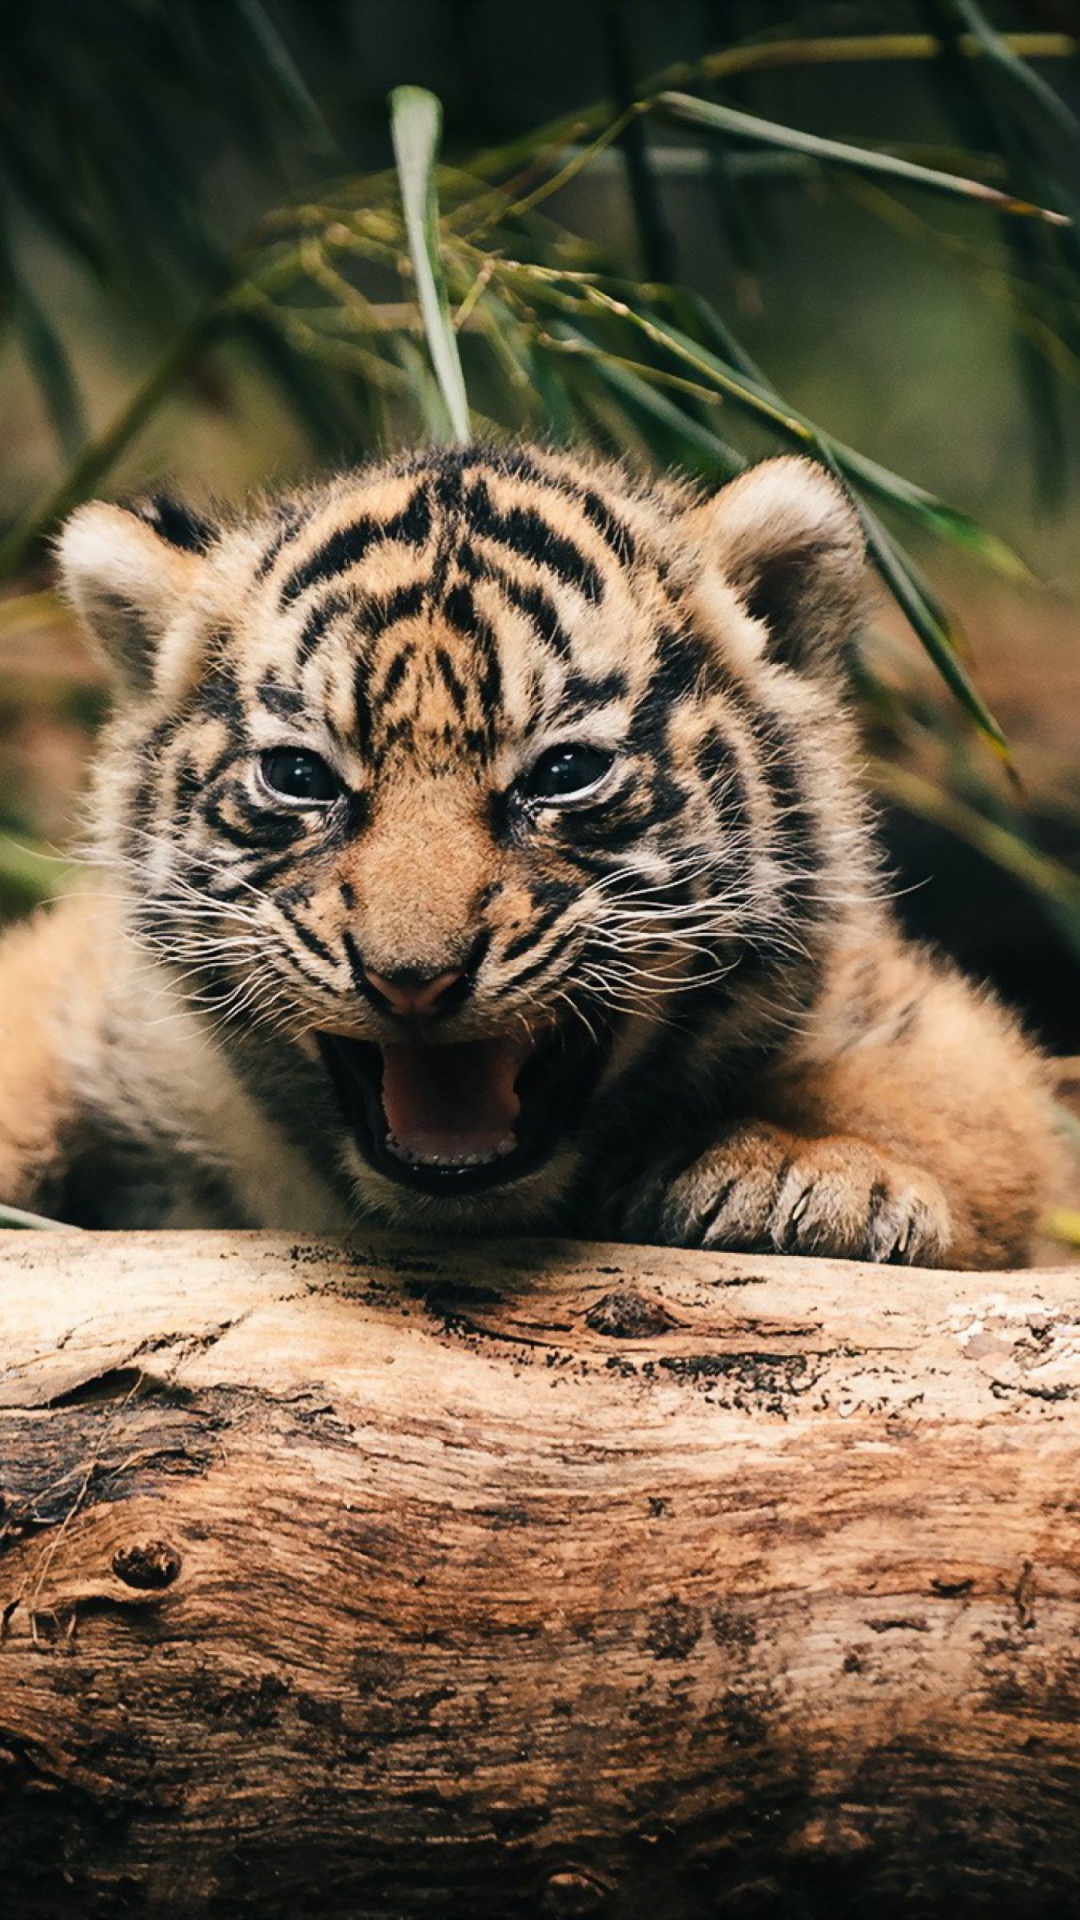 Baby Tiger Wallpaper for iPhone 7 Plus